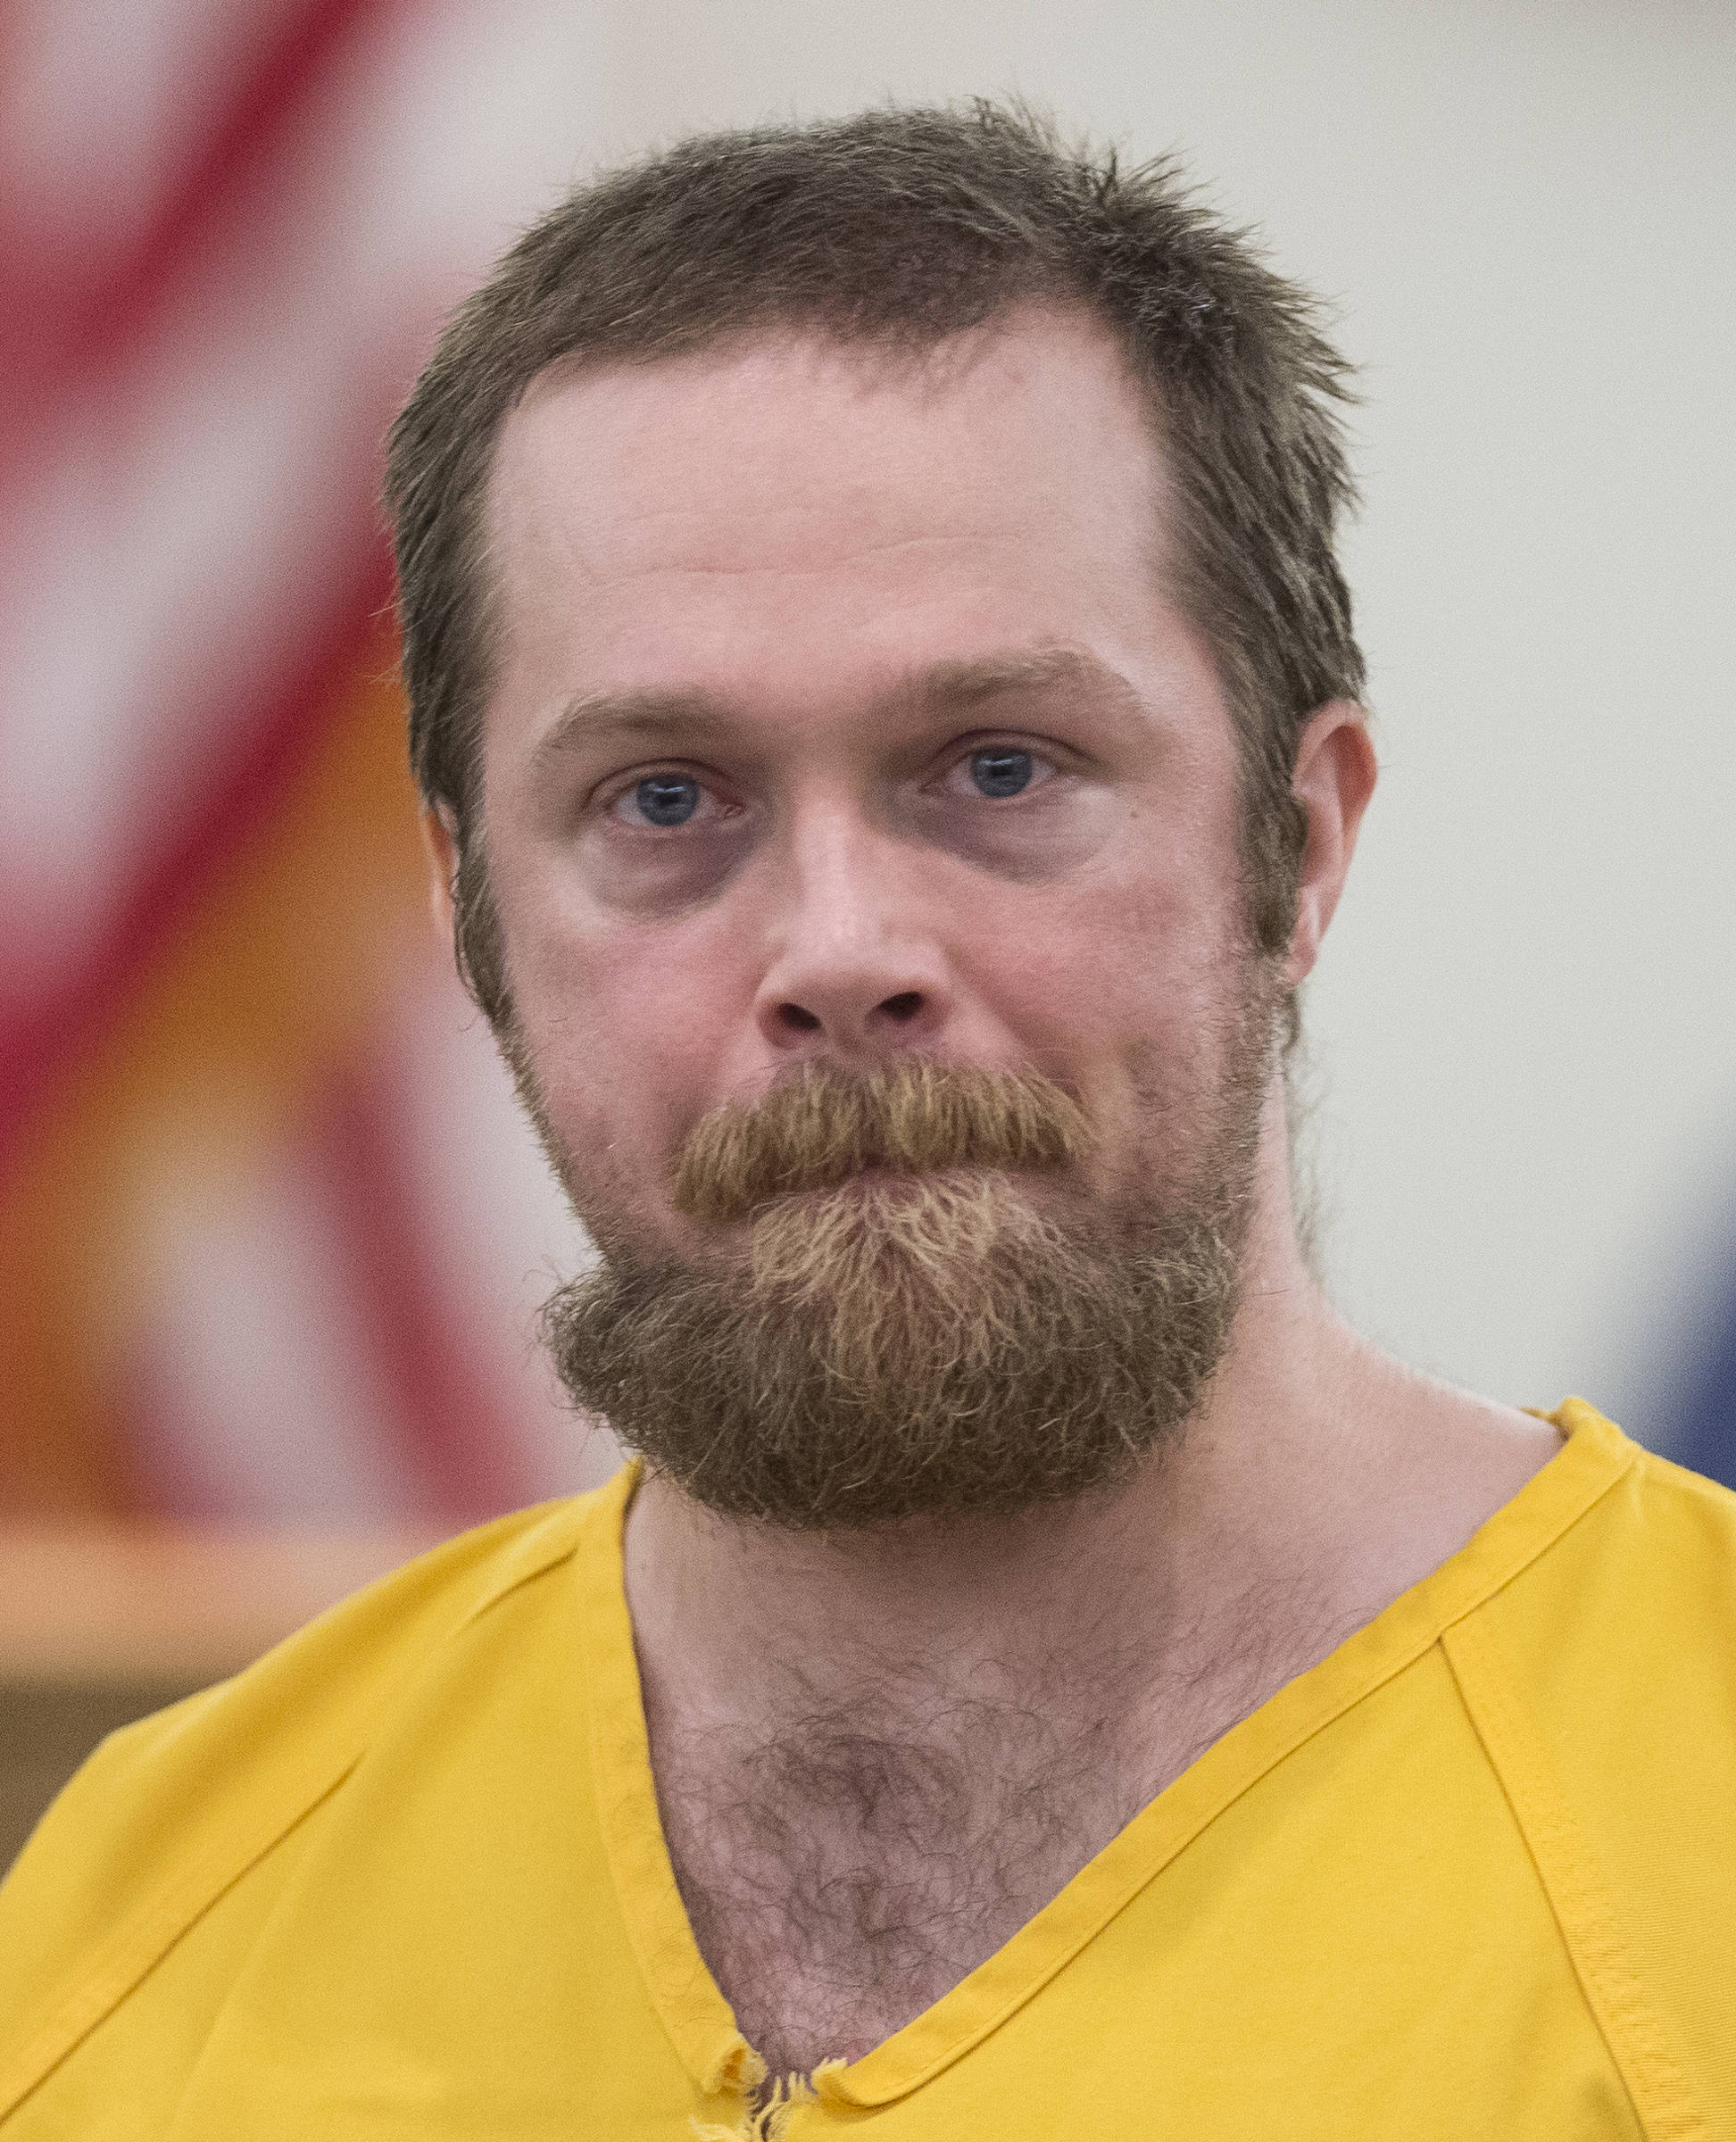 Christopher Strawn appears in Juneau Superior Court on Wednesday, June 20, 2018, for sentencing in the 2015 murder of Brandon Cook. (Michael Penn | Juneau Empire)